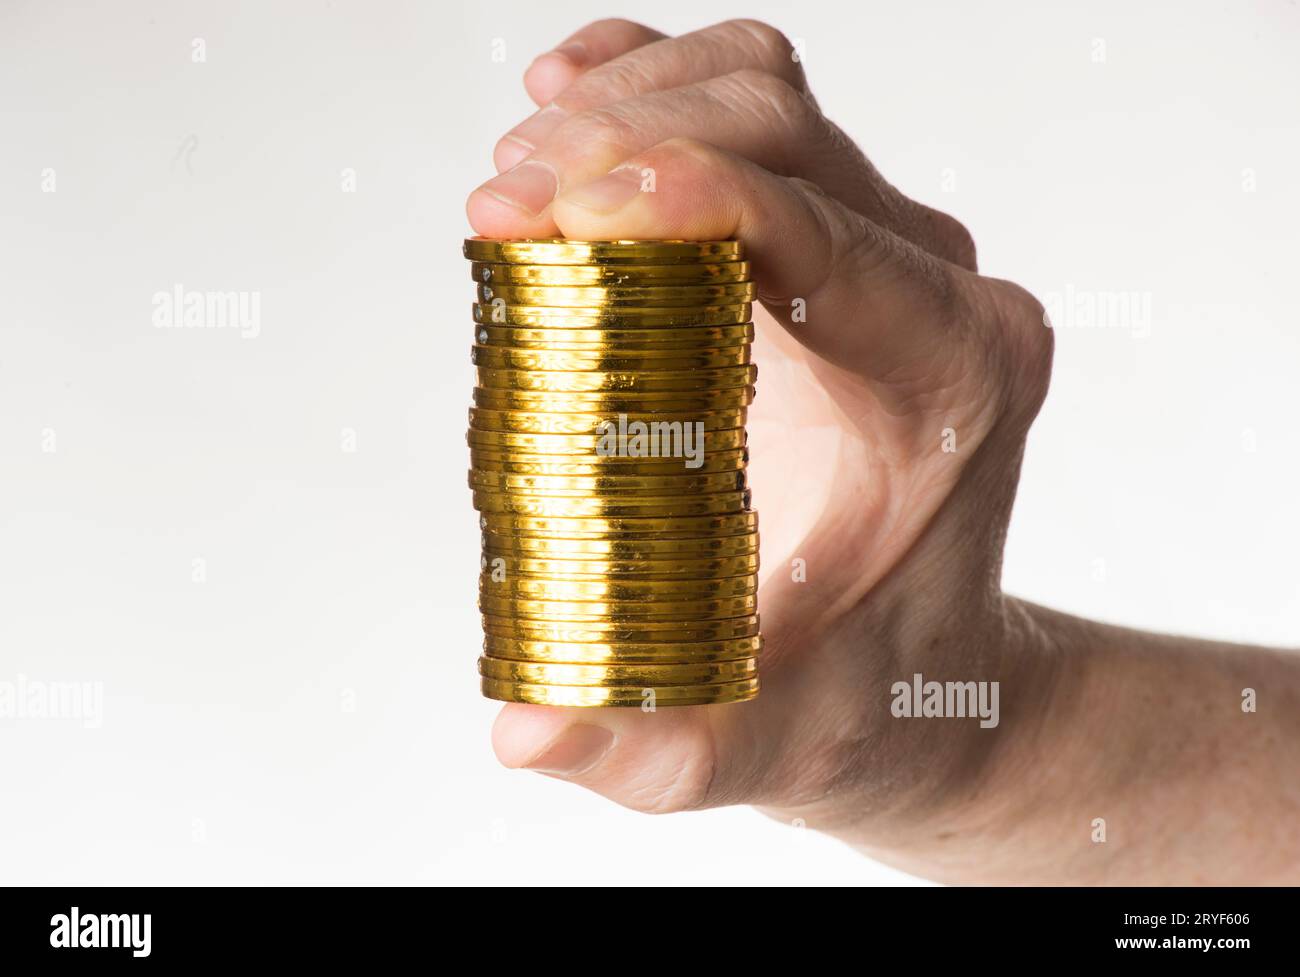 Gold coins as medium of exchange and payment Stock Photo